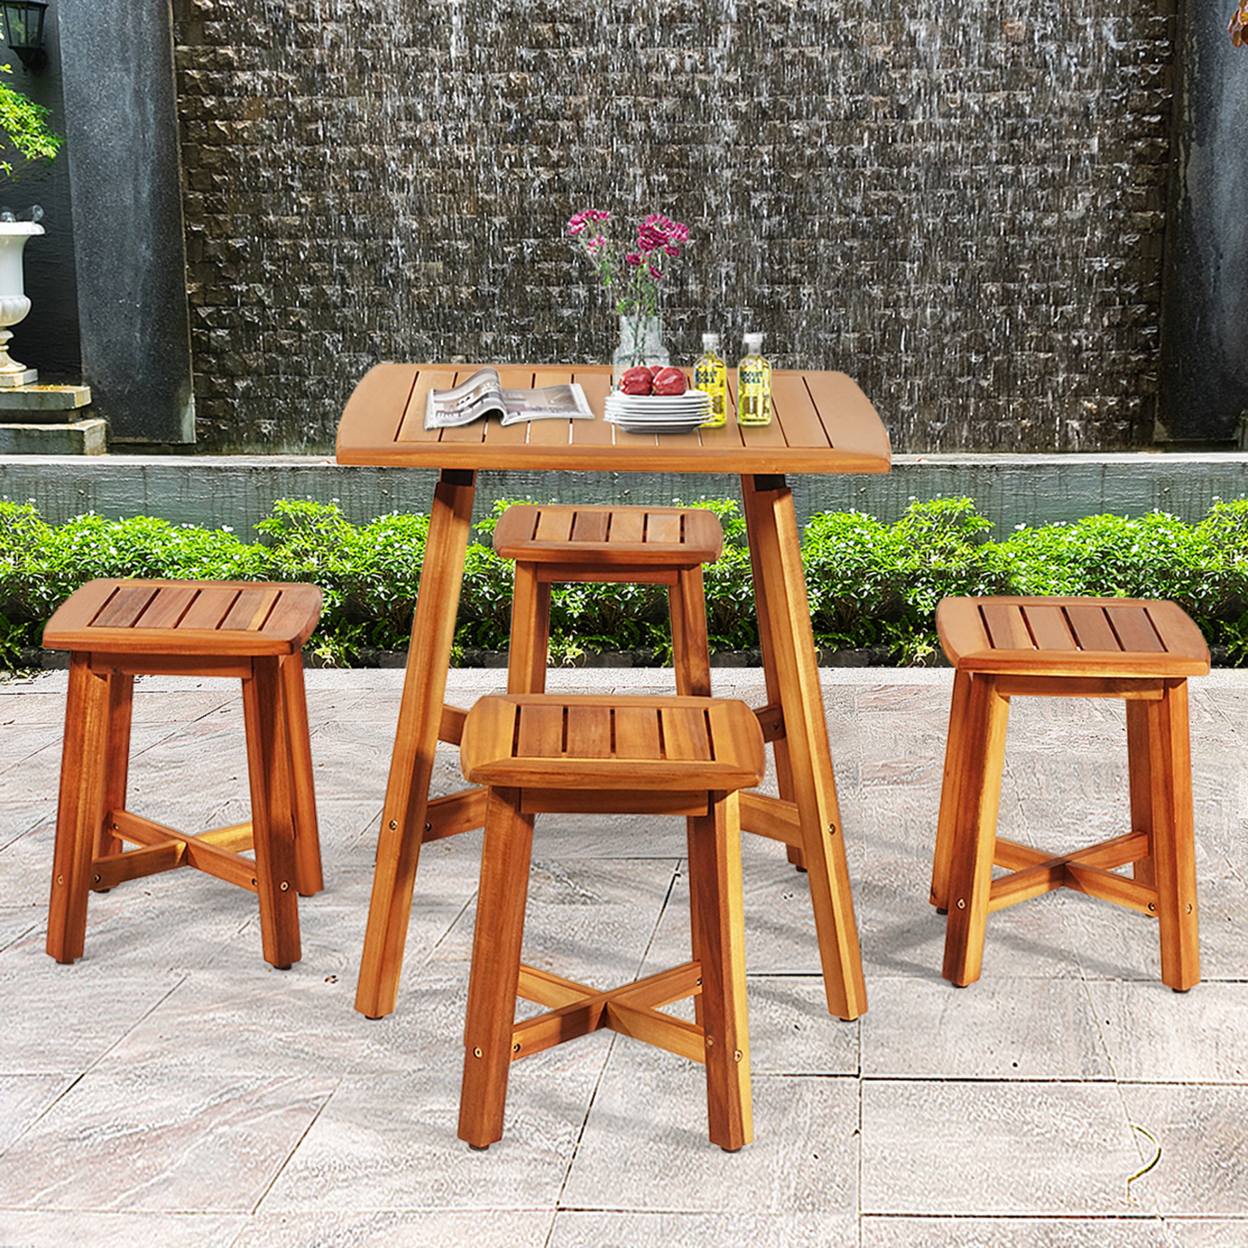 5PCS Wooden Patio Dining Furniture Set Yard Outdoor W/ 4 Square Stools